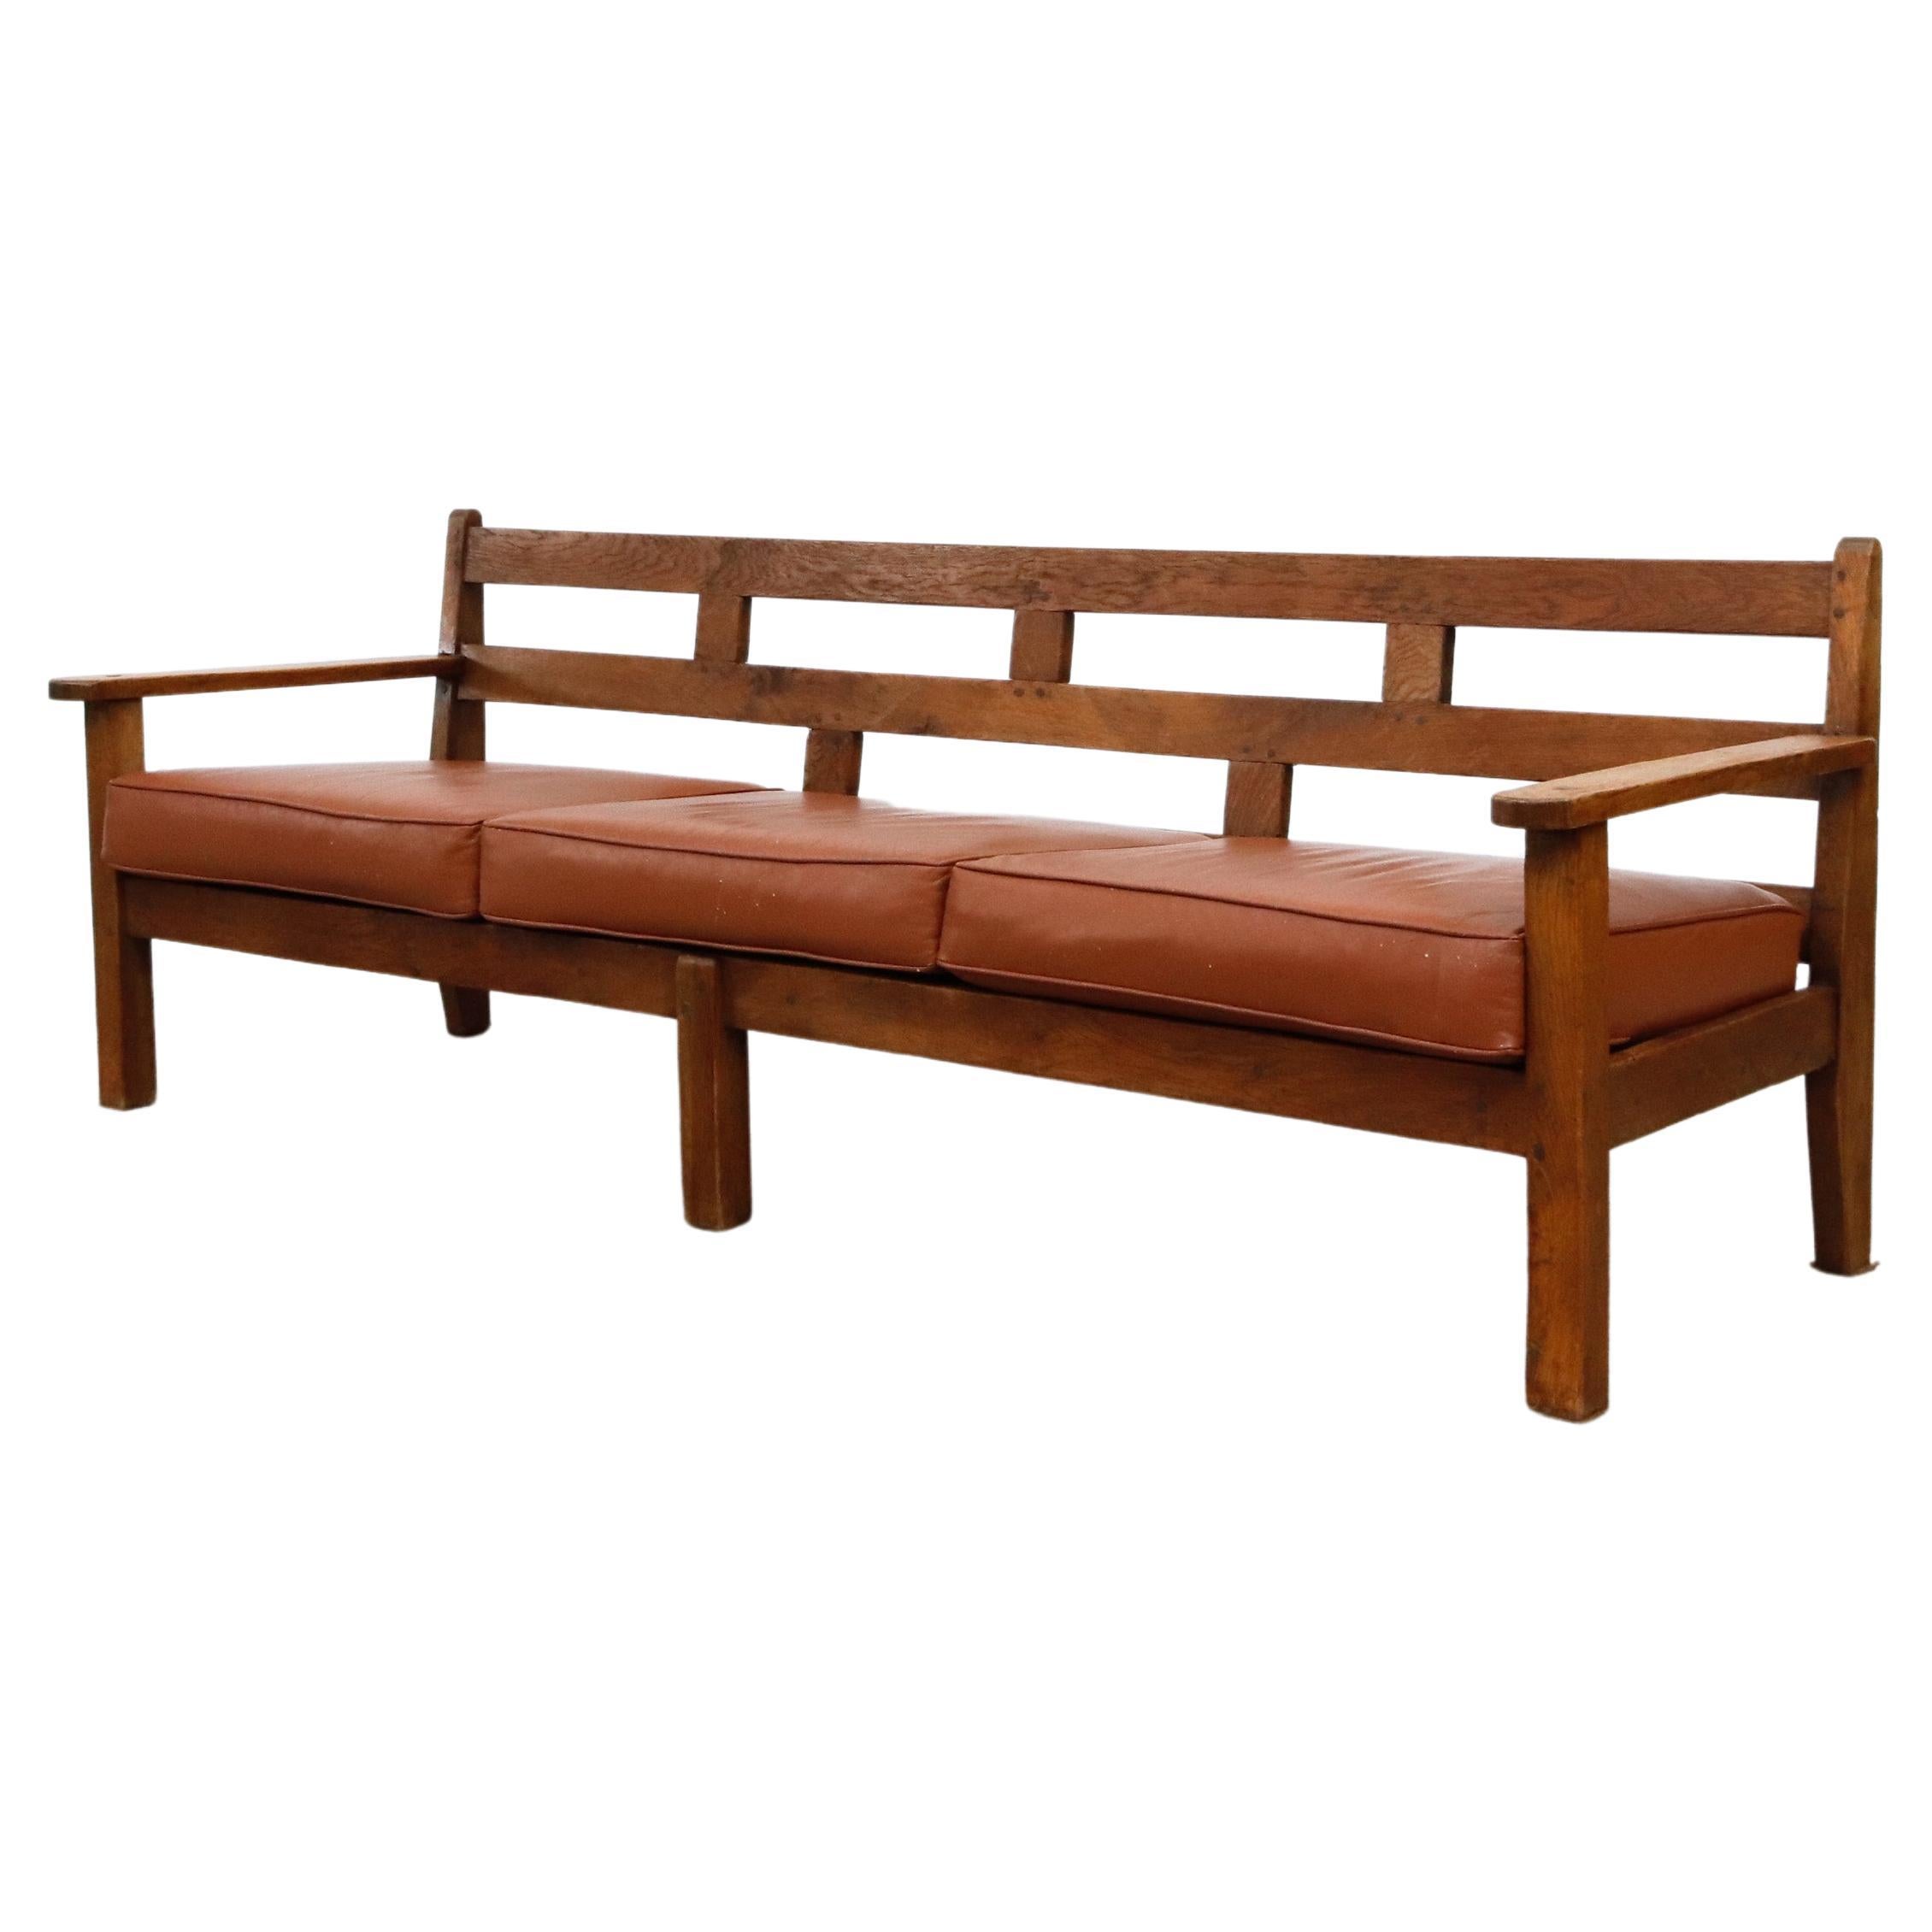 Large Dutch Oak Bench with Brown Leather Seat Cushion